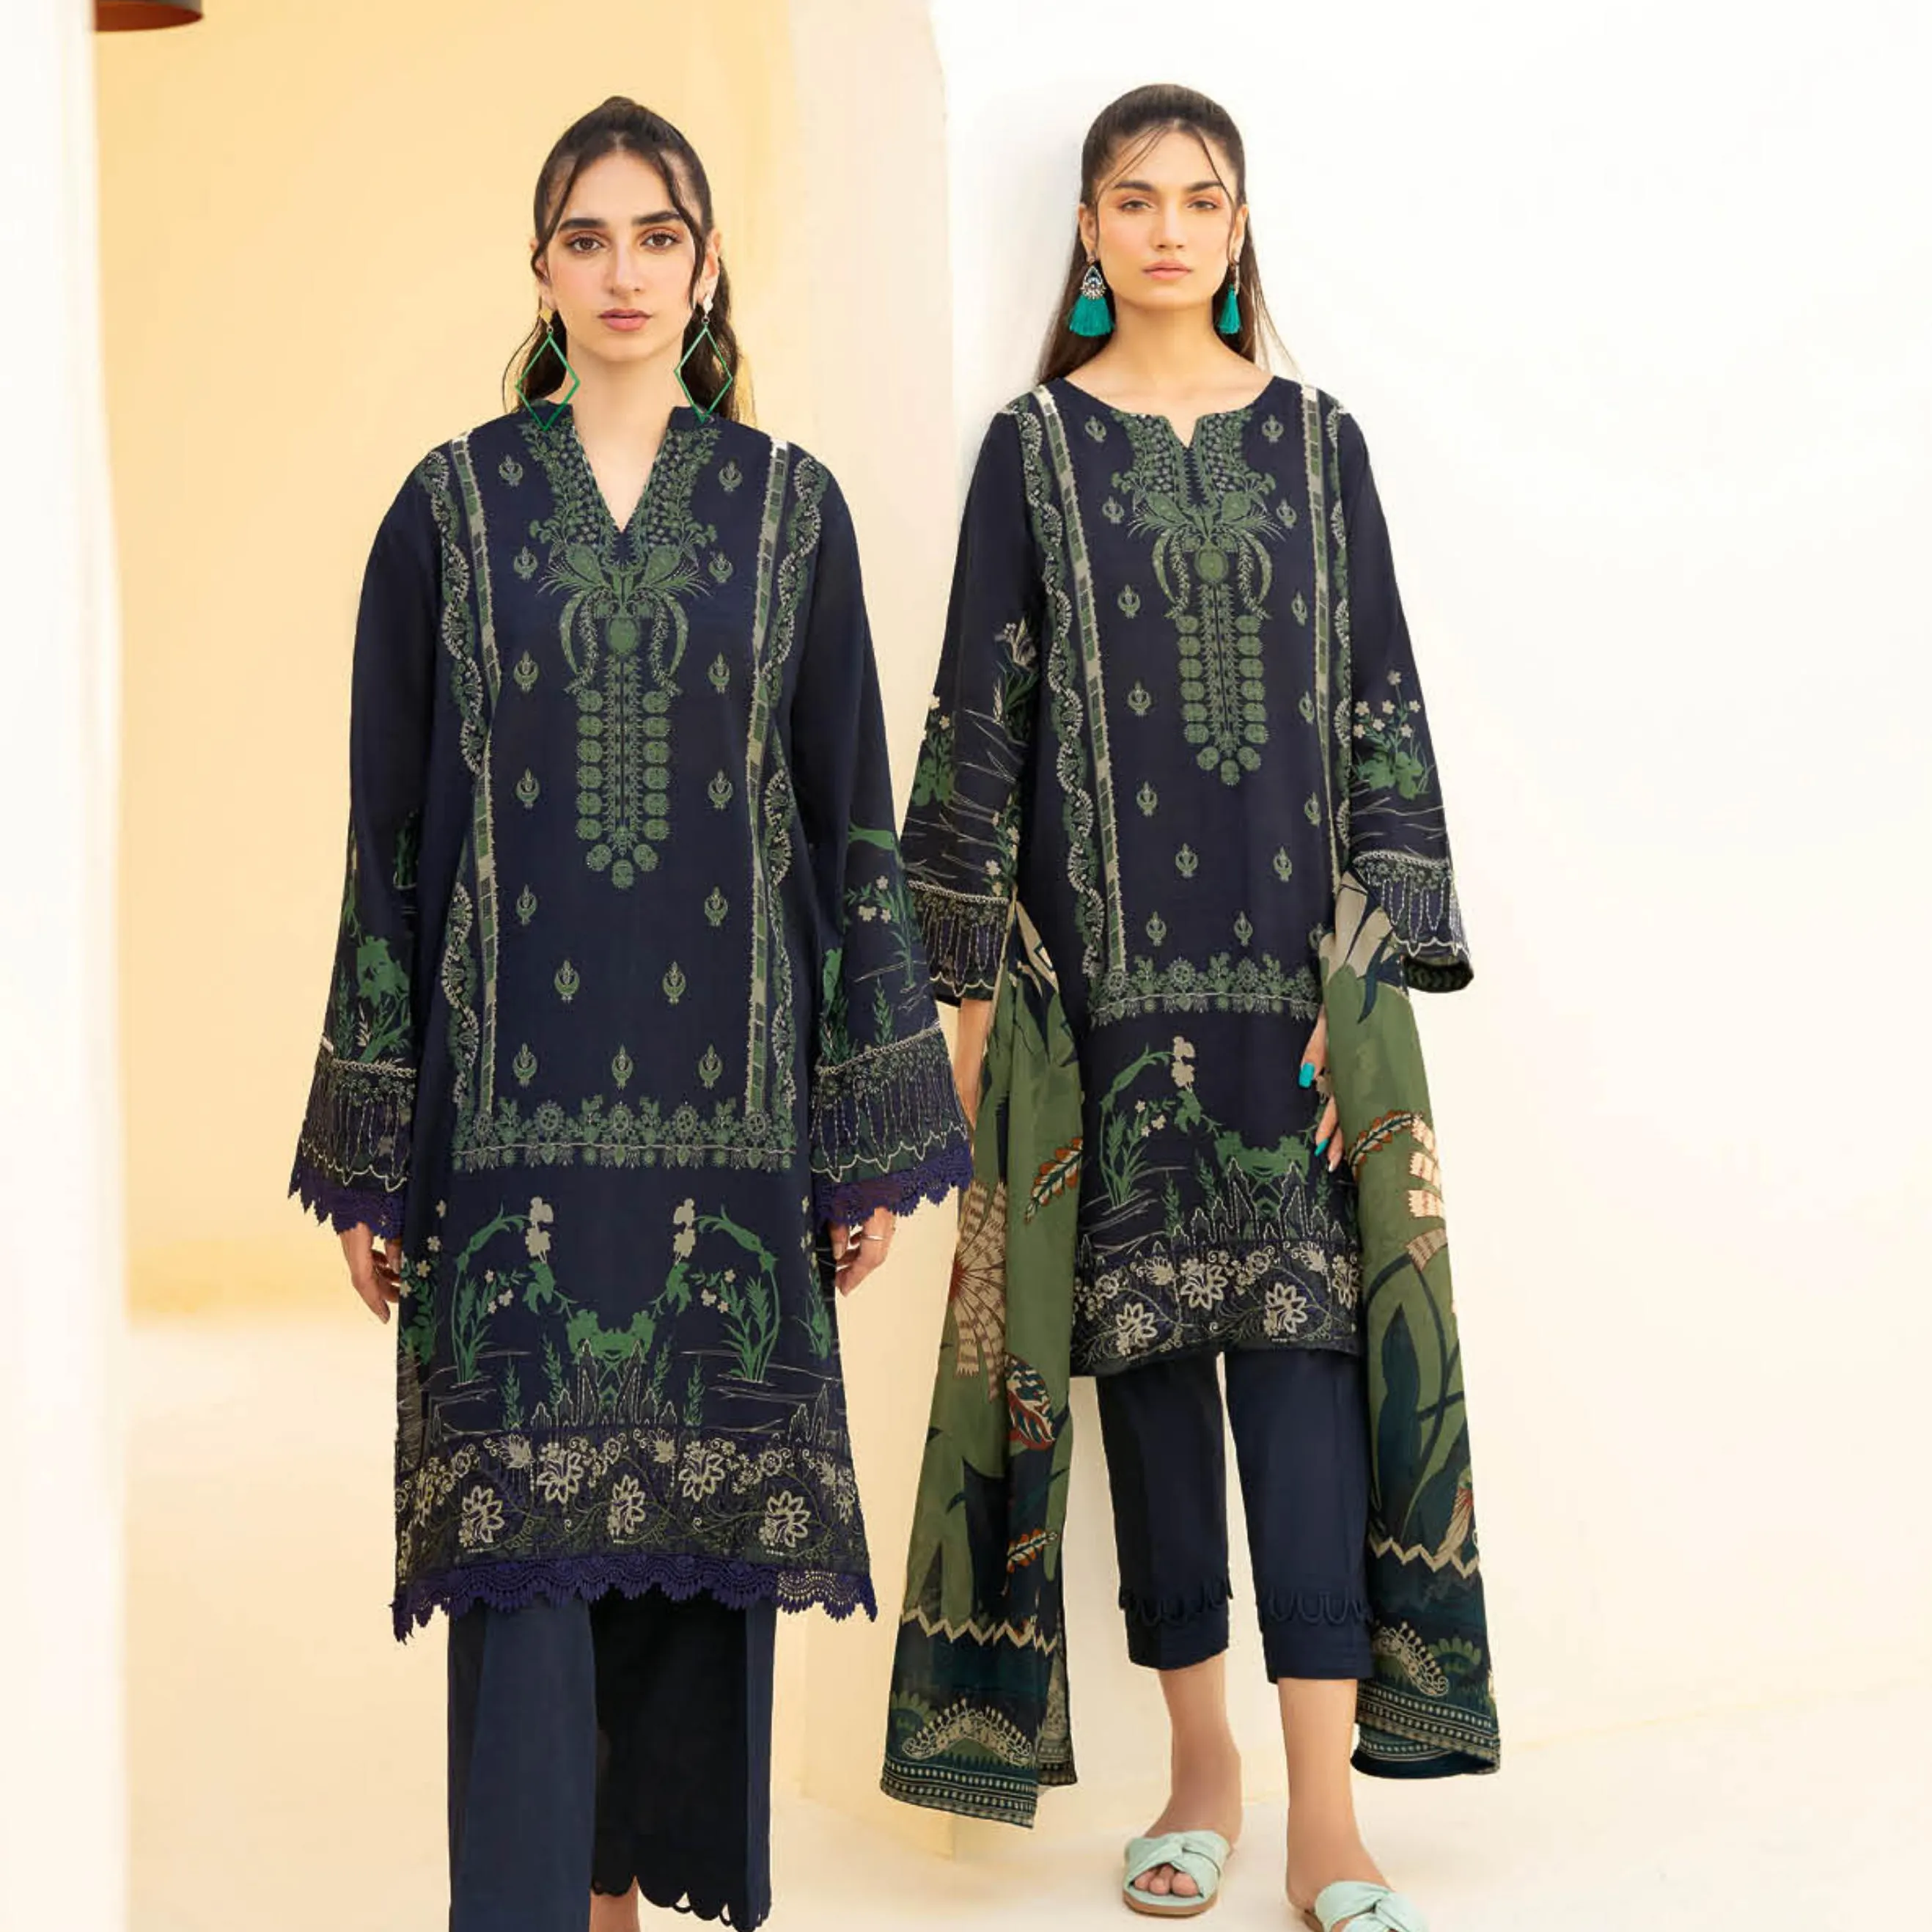 SS Collection Khaddar embroidered suit Pakistani women clothing Ramsha Dastoor unstitched ladies suit winter collections